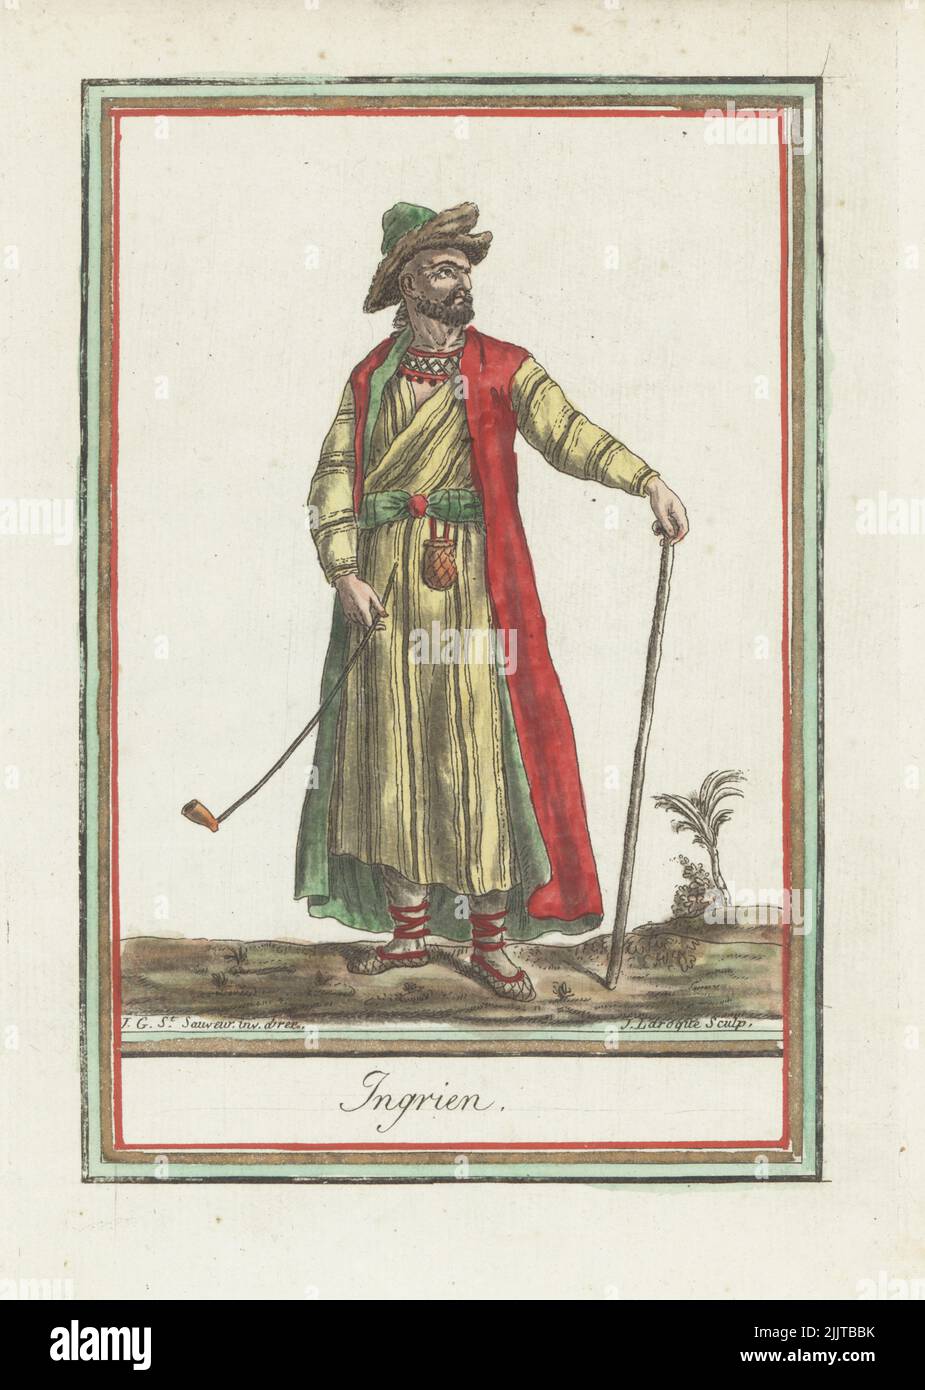 Ingrian man of Saint Petersburg, Russia. In Russian fur cap, sleeveless tunic, animal-skin robe with coloured bands, belt, gaiters, leather shoes, holding a tobacco pipe and staff. Ingrien. Handcoloured copperplate engraving by J. Laroque after a design by Jacques Grasset de Saint-Sauveur from his Encyclopedie des voyages, Encyclopedia of Voyages, Bordeaux, France, 1792. Stock Photo